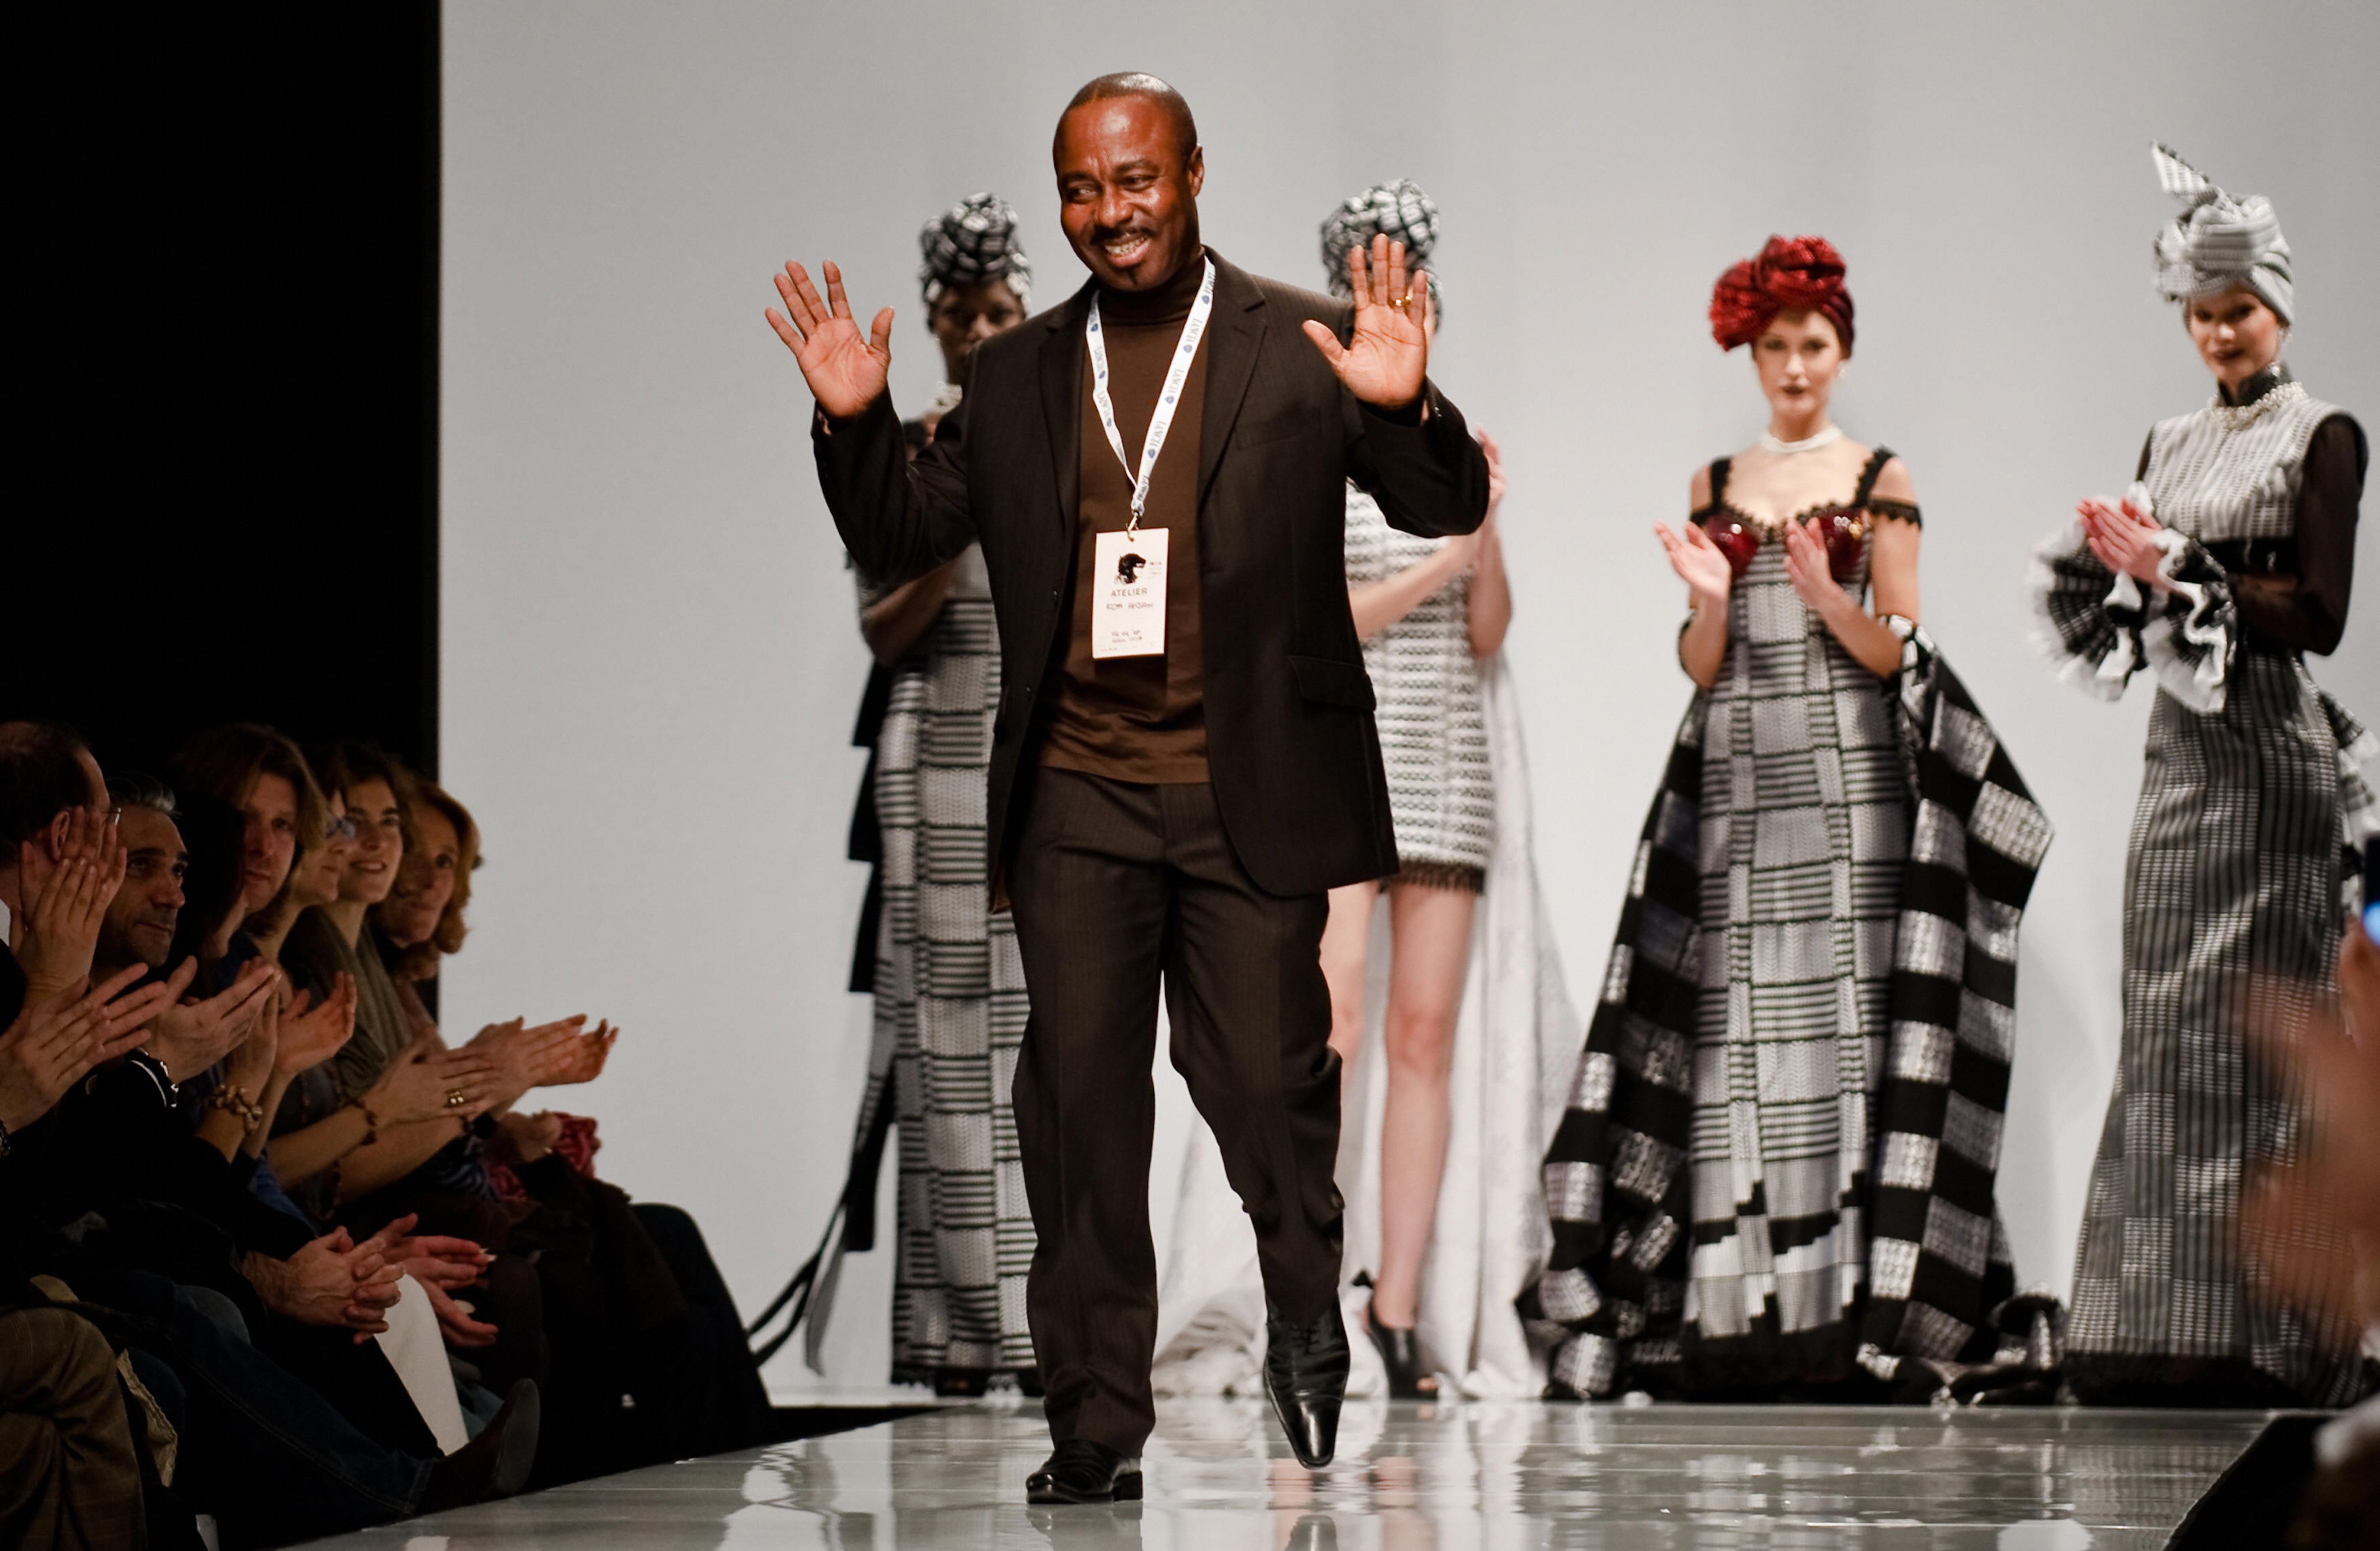 Ghanaian designer Kofi Ansah at the end of one of his shows in 2009